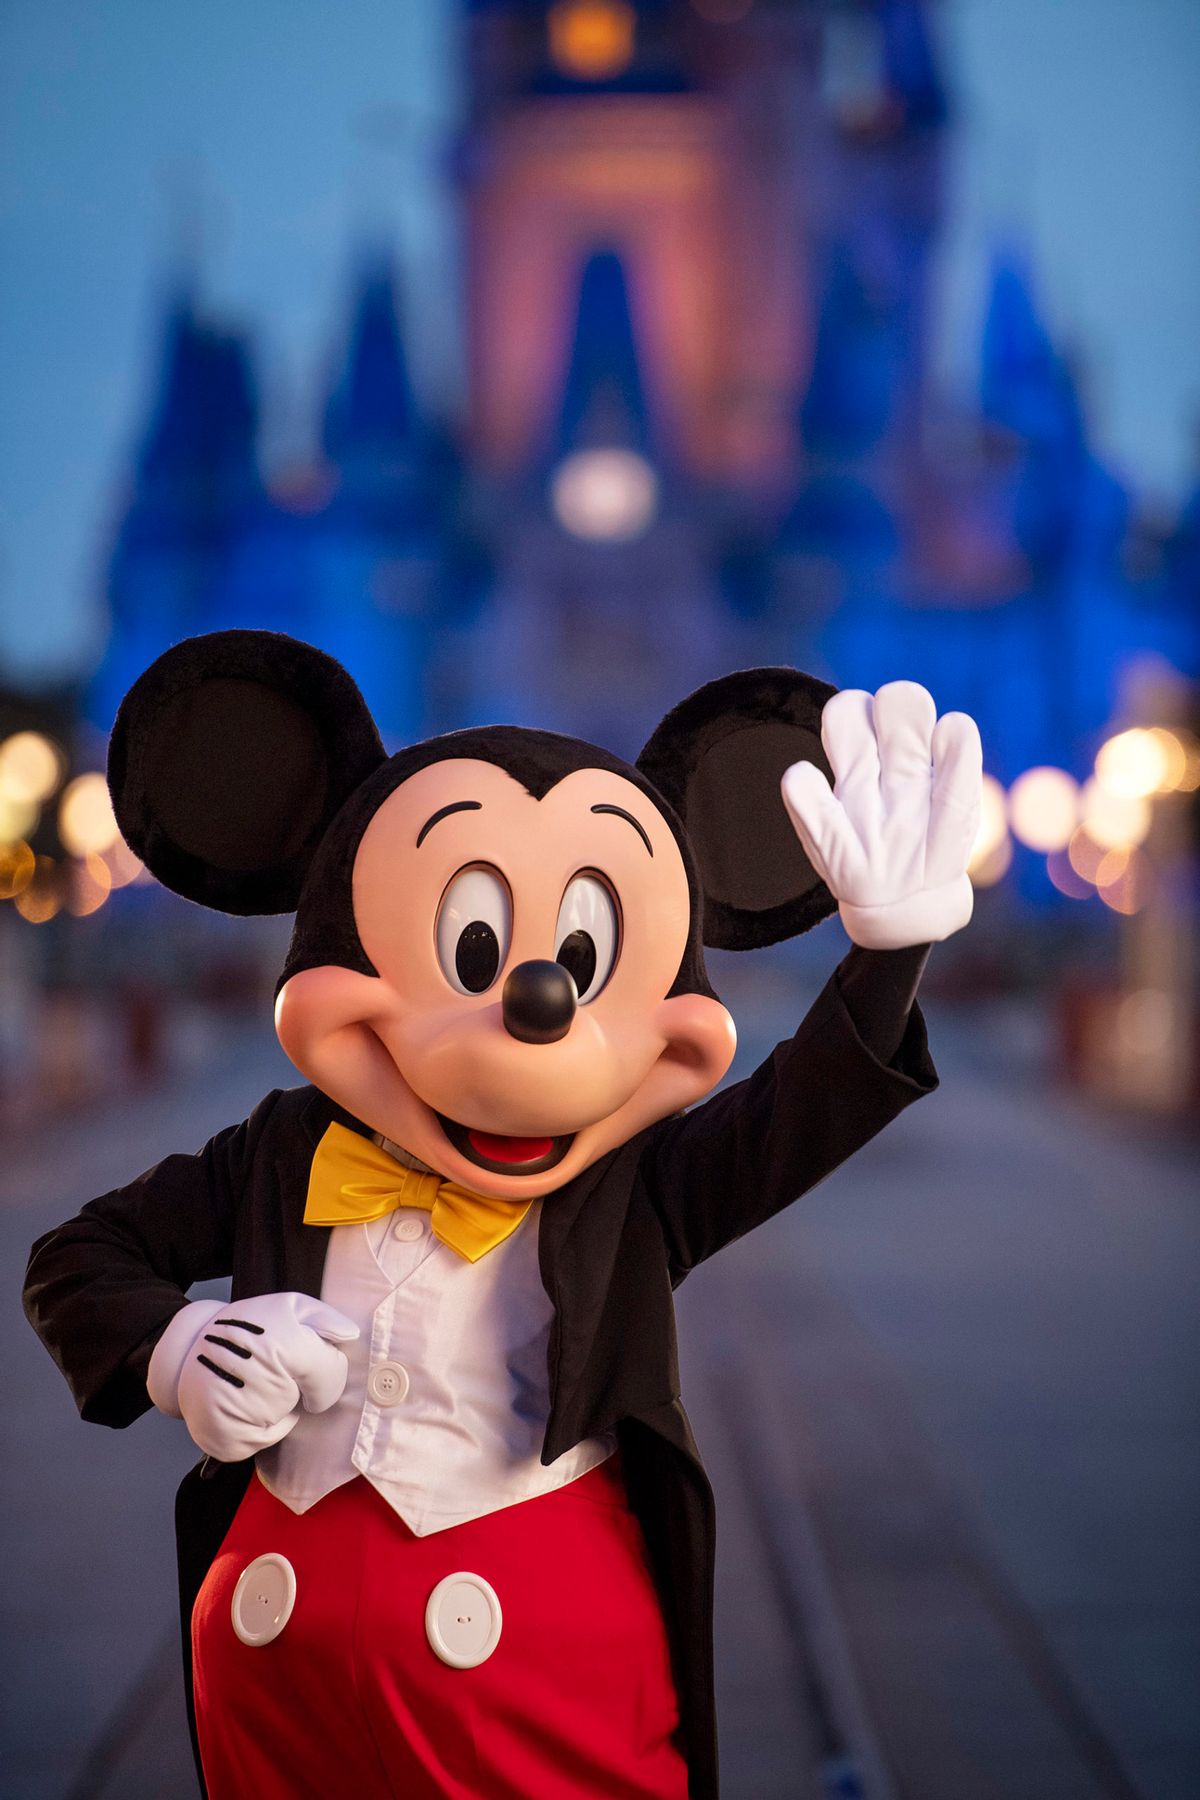 LAKE BUENA VISTA, FL - JULY 11:  In this handout photo provided by Walt Disney World Resort, Mickey Mouse pauses on Main Street, U.S.A. just before sunrise at Walt Disney World Resort on July 11, 2020 in Lake Buena Vista, Florida. (Photo by Kent Phillips/Walt Disney World Resort via Getty Images) (Kent Phillips/Walt Disney World Resort via Getty Images)